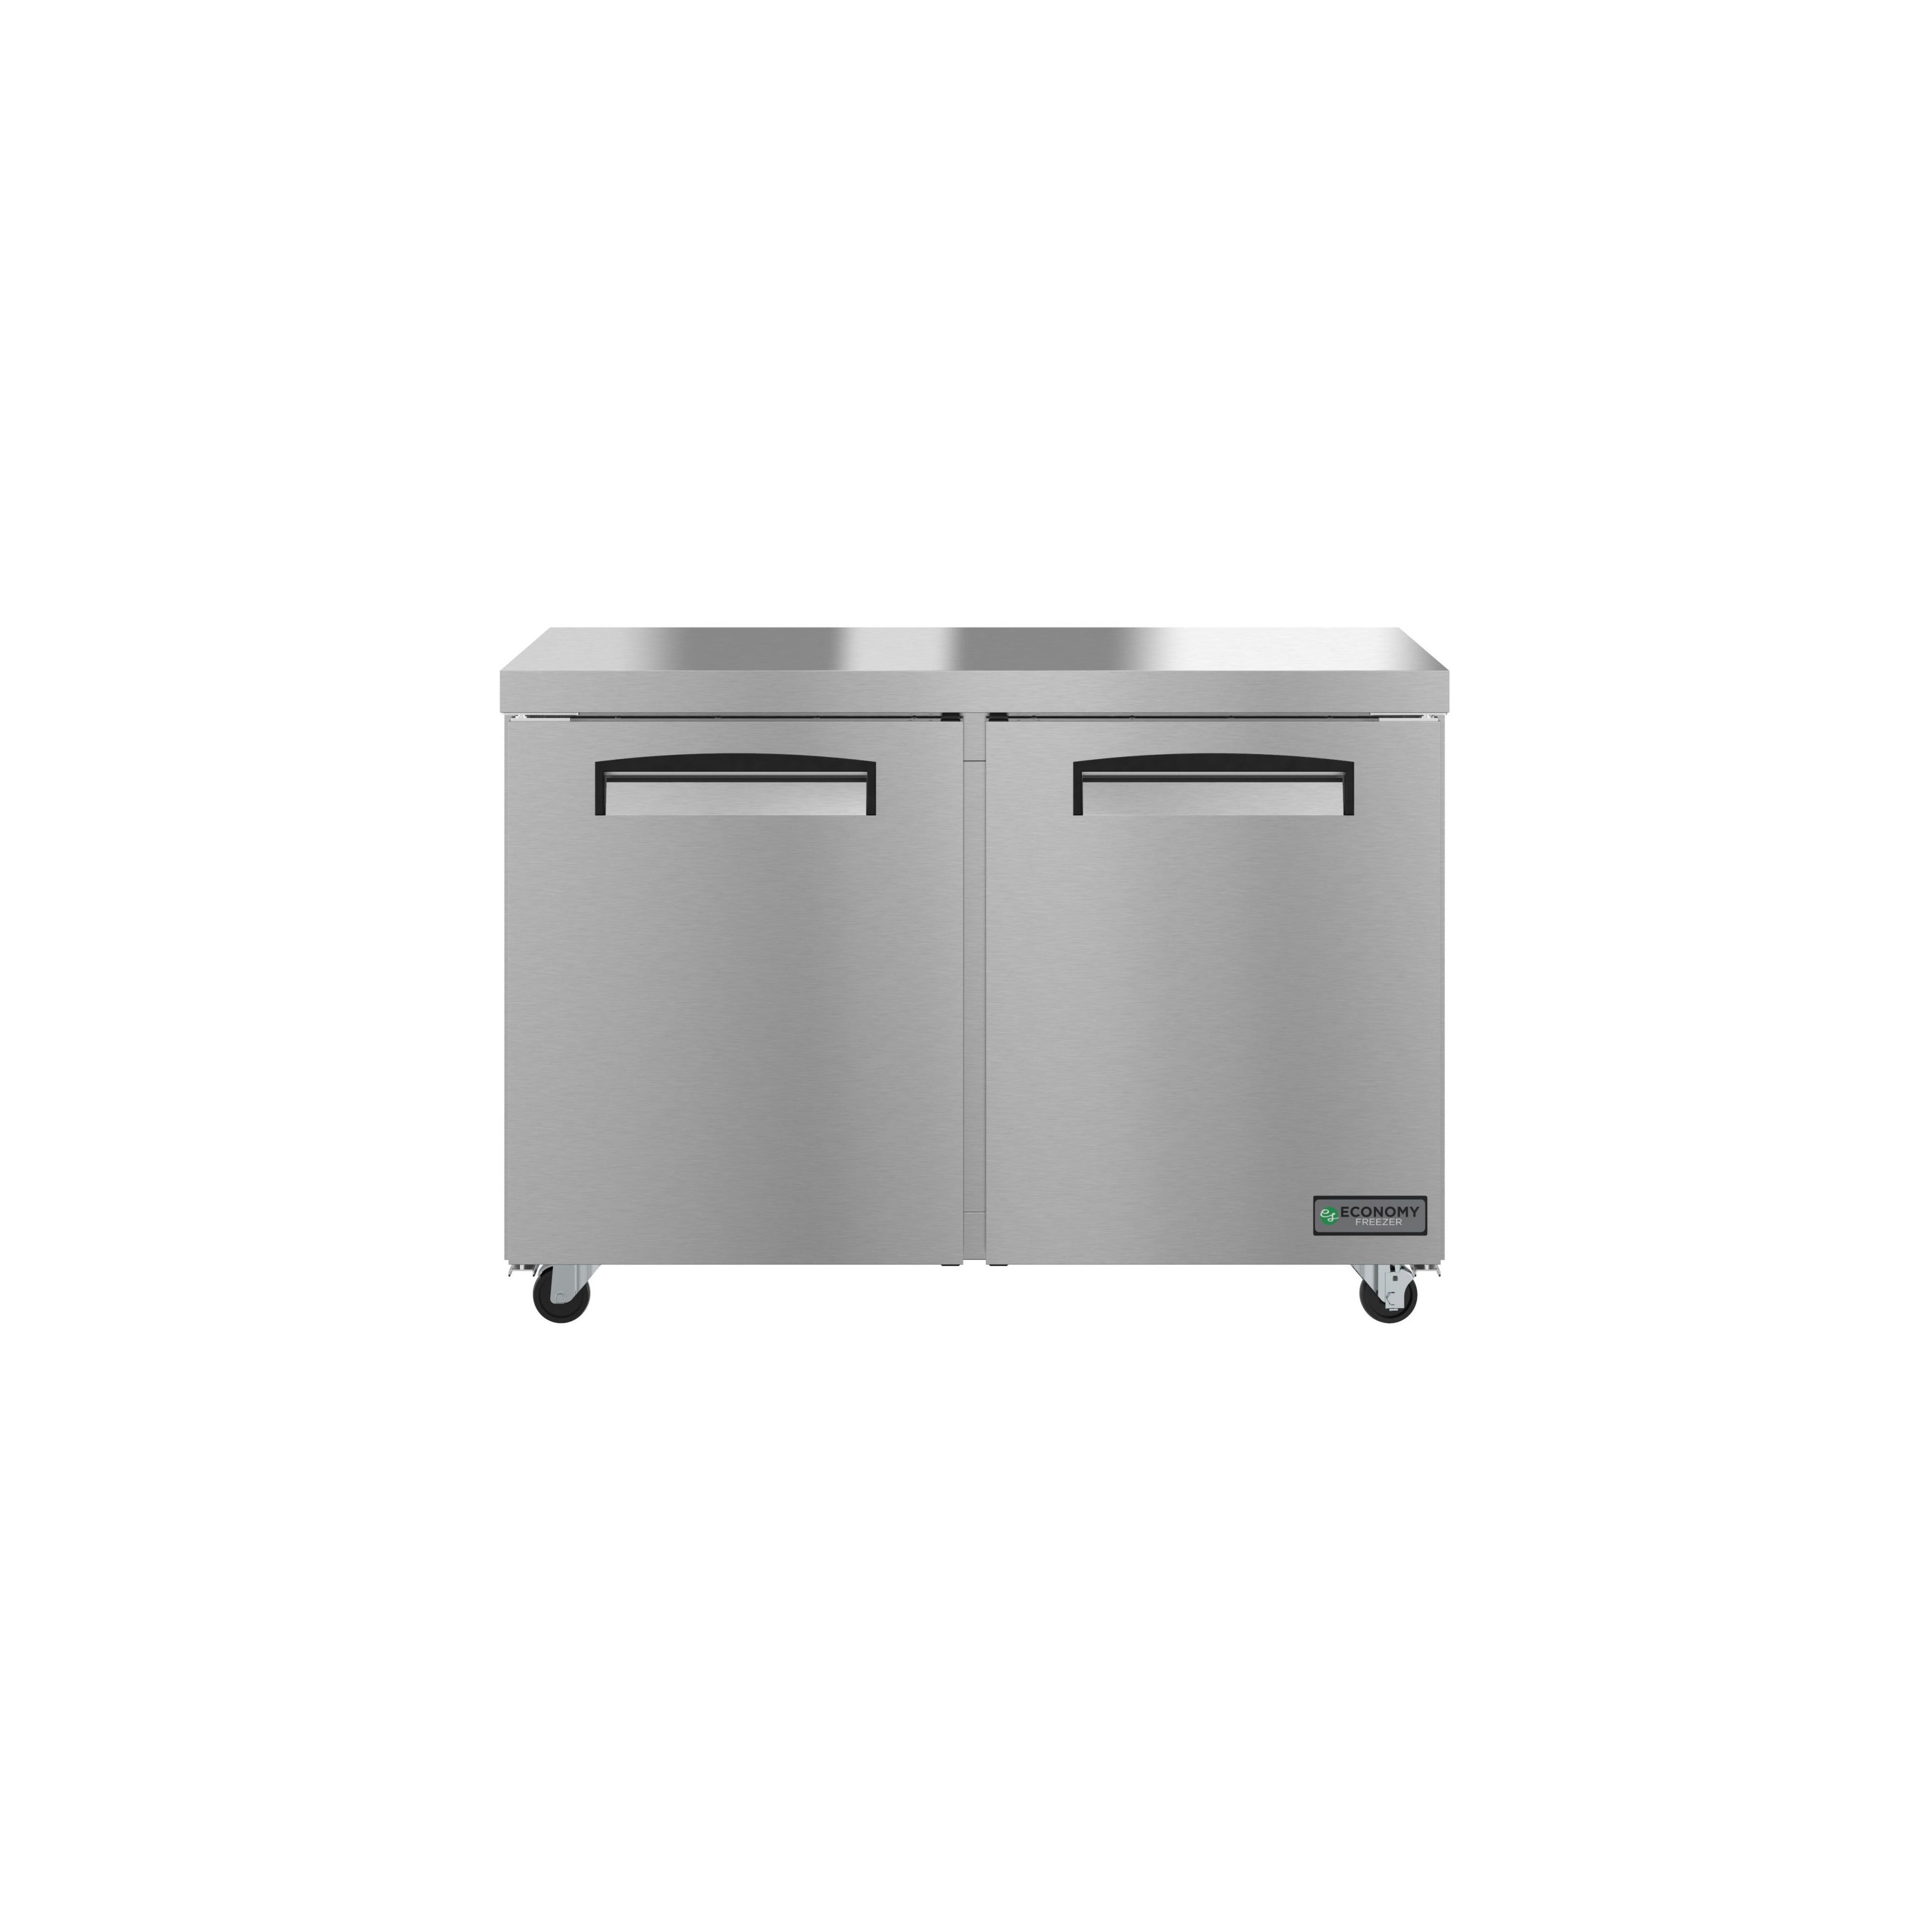 Hoshizaki - EUR48A, Commercial 47.75" Two Section Undercounter Refrigerator Stainless Doors 12.9cu.ft.